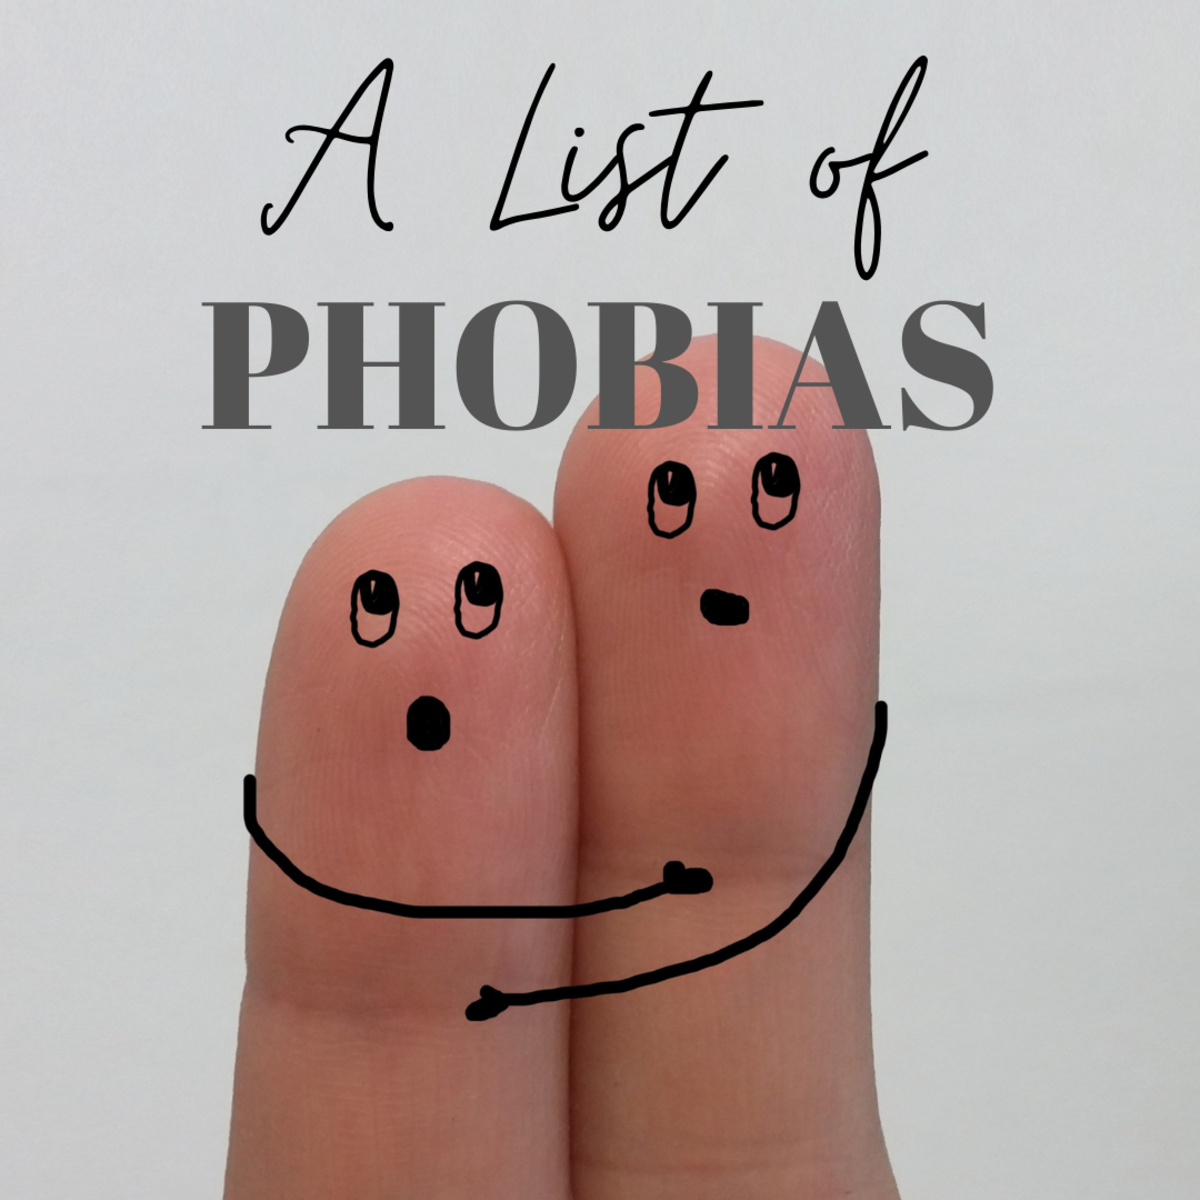 A Comprehensive List of Phobias and Obscure Fears